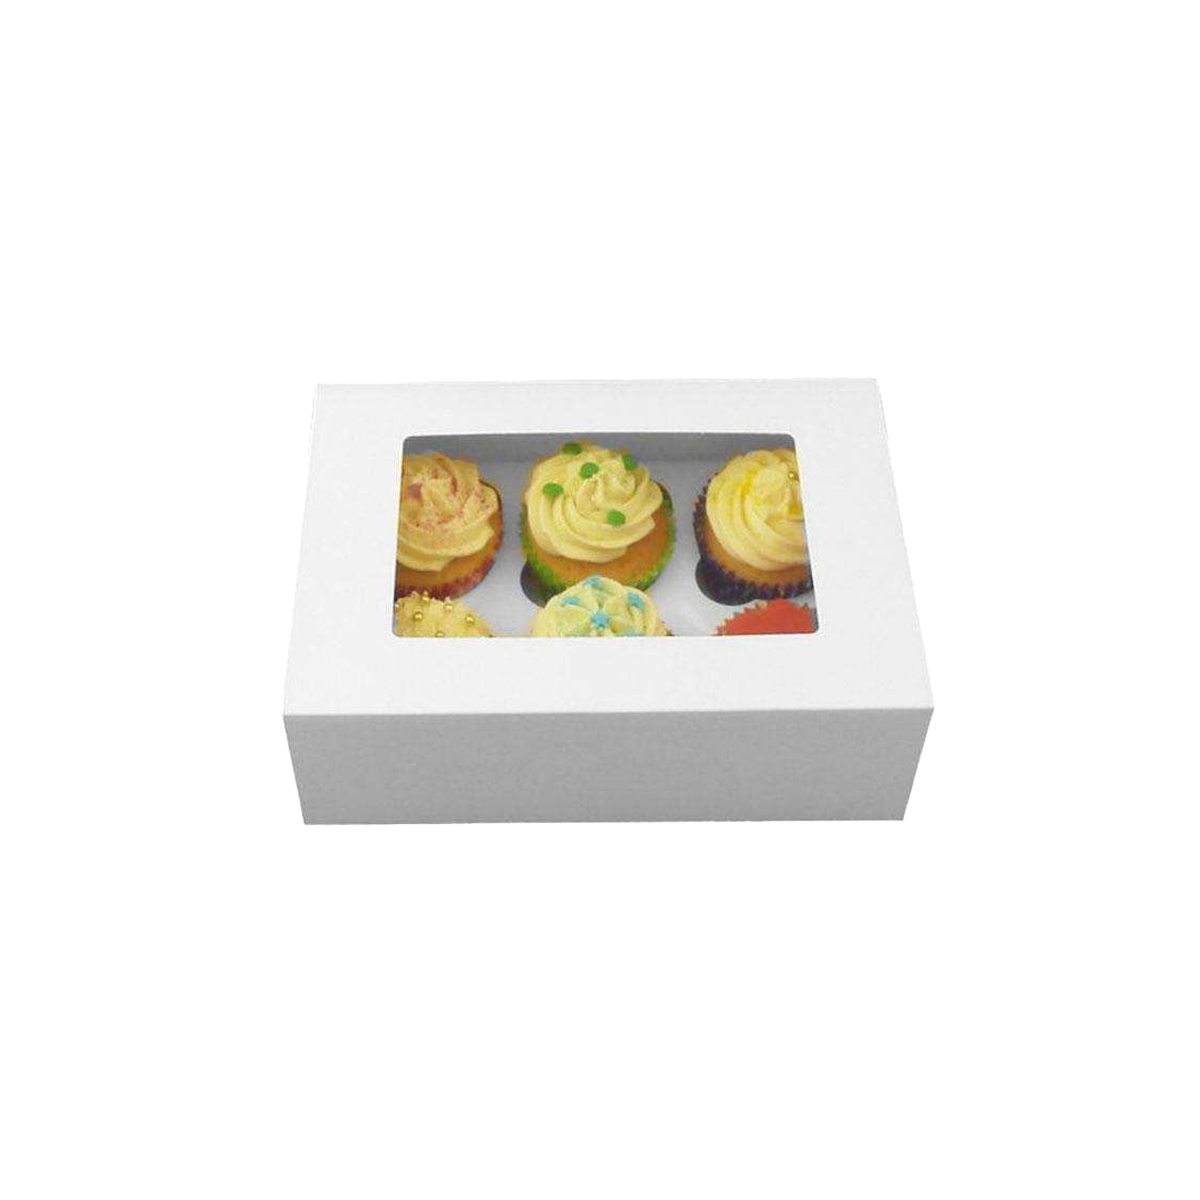 Custom Muffin Boxes